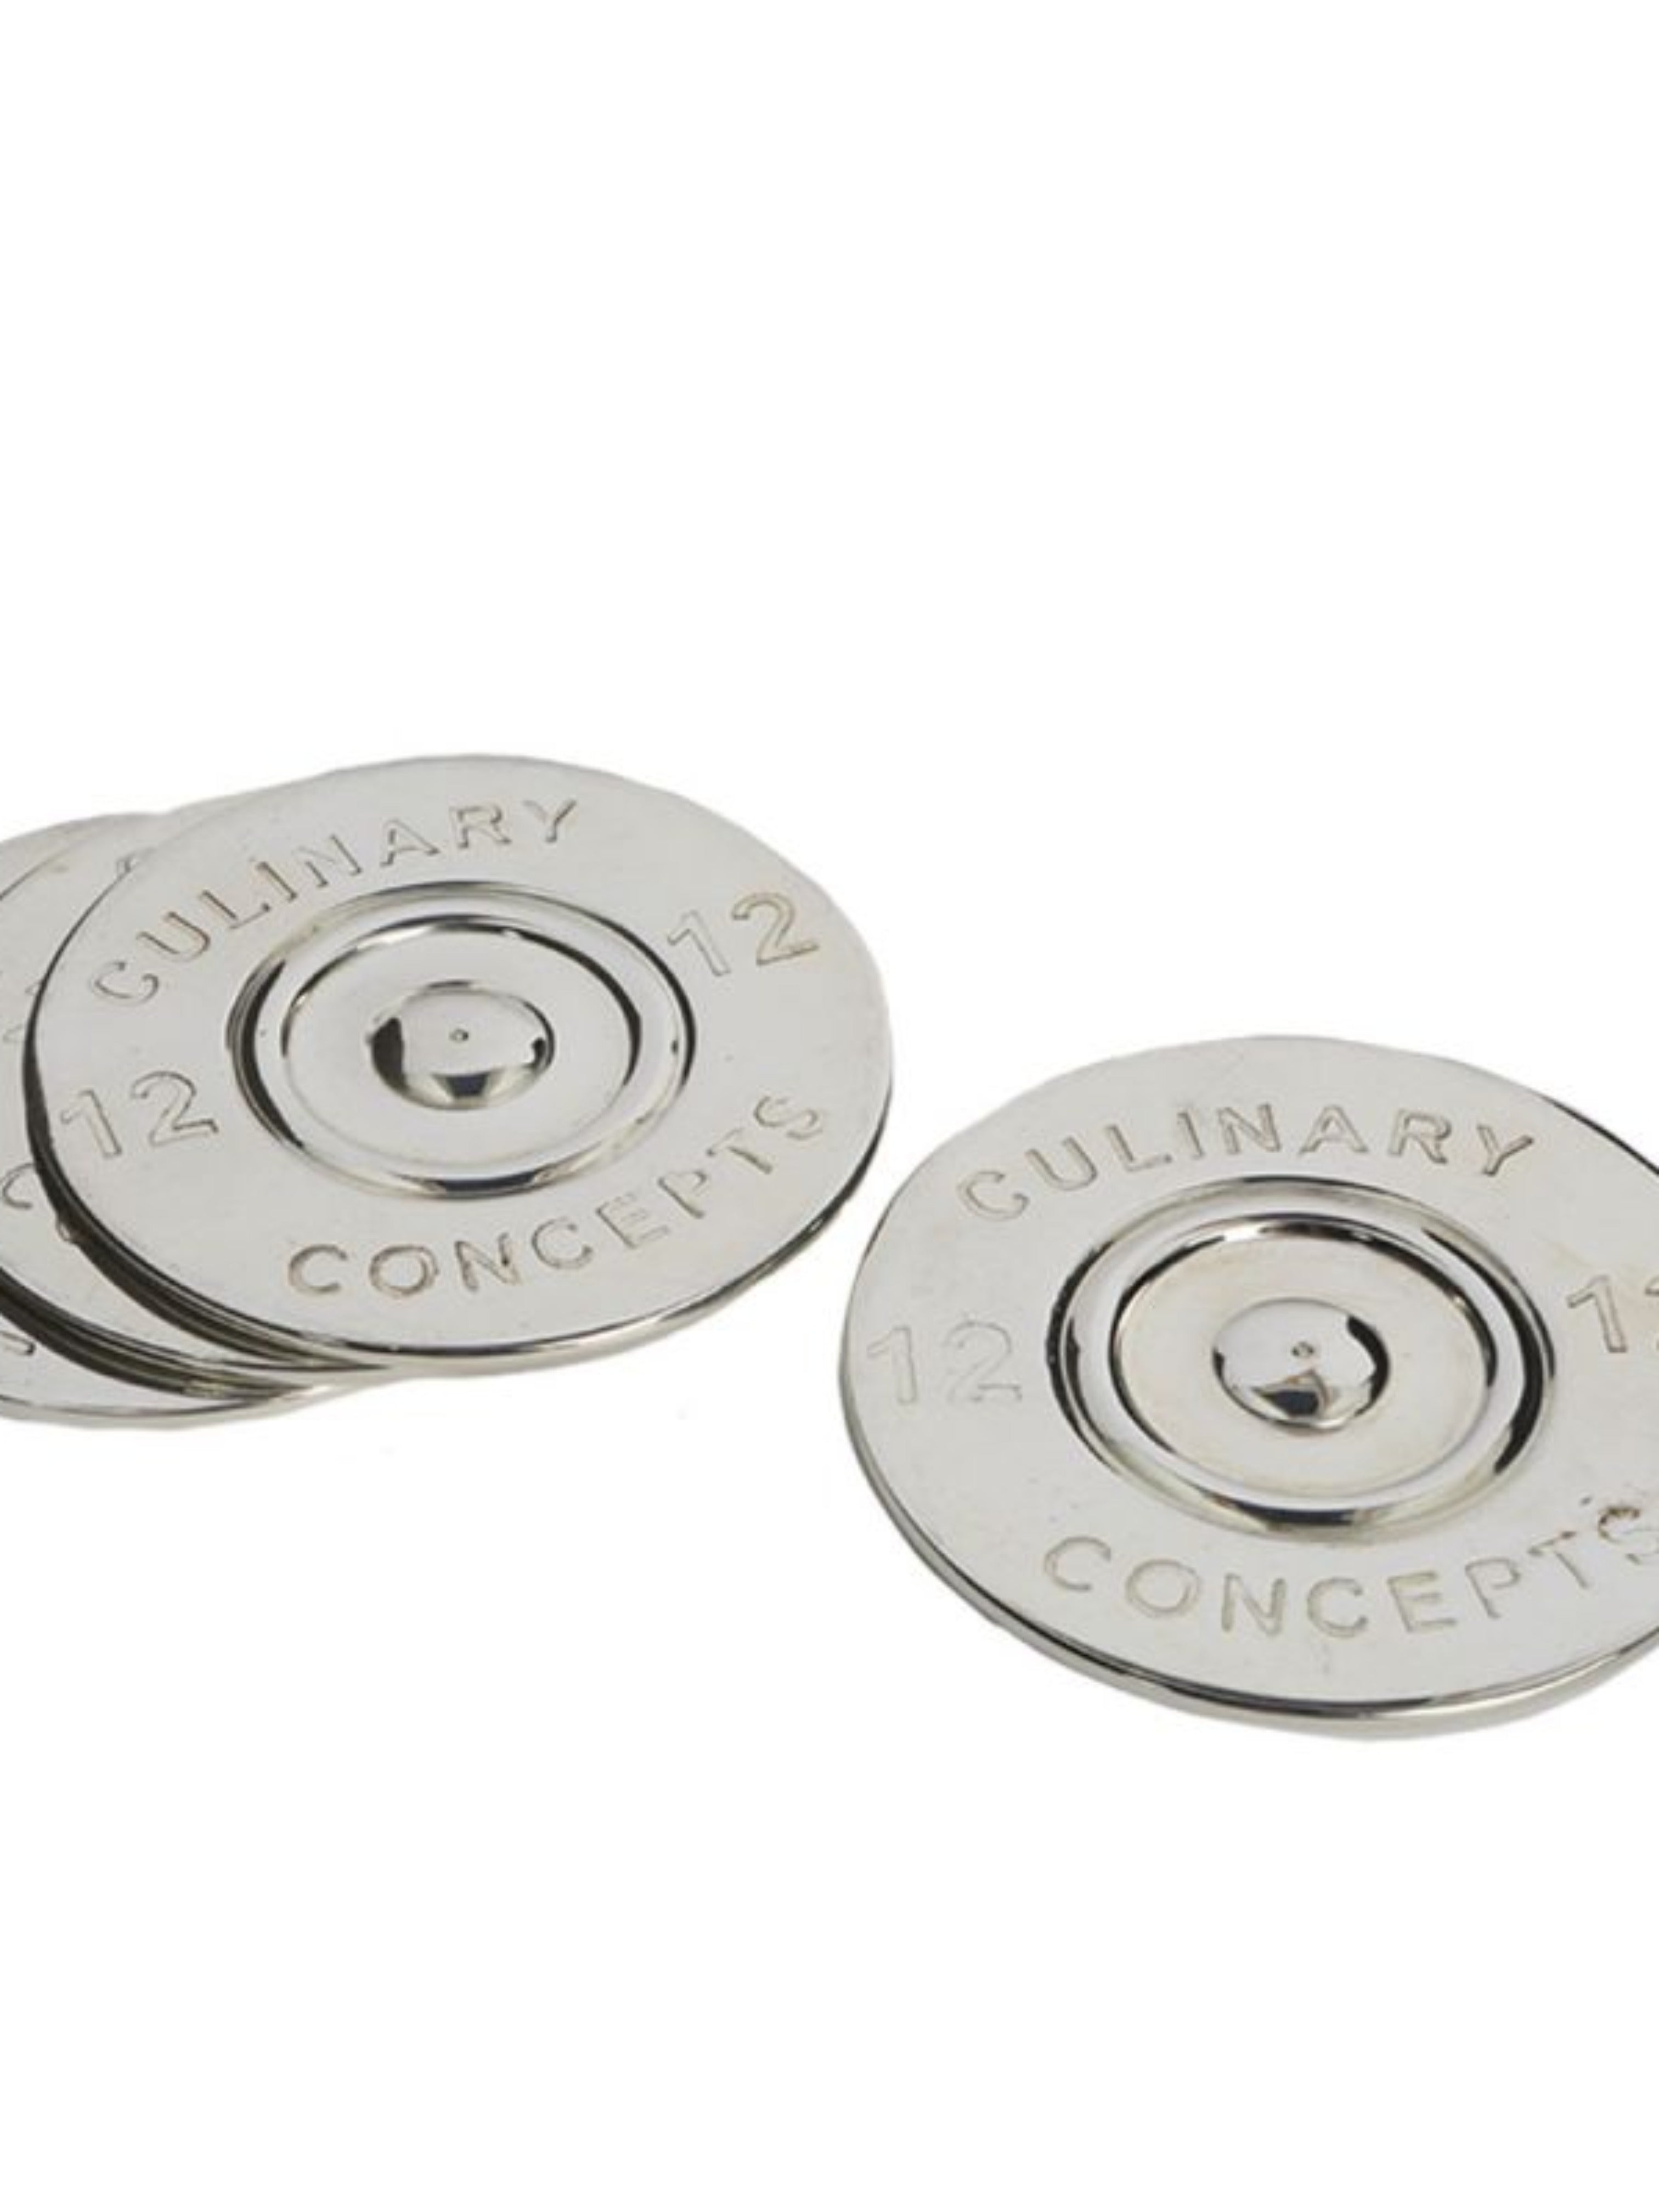 Culinary Concepts Set of Four Cartridge Bottle Coasters